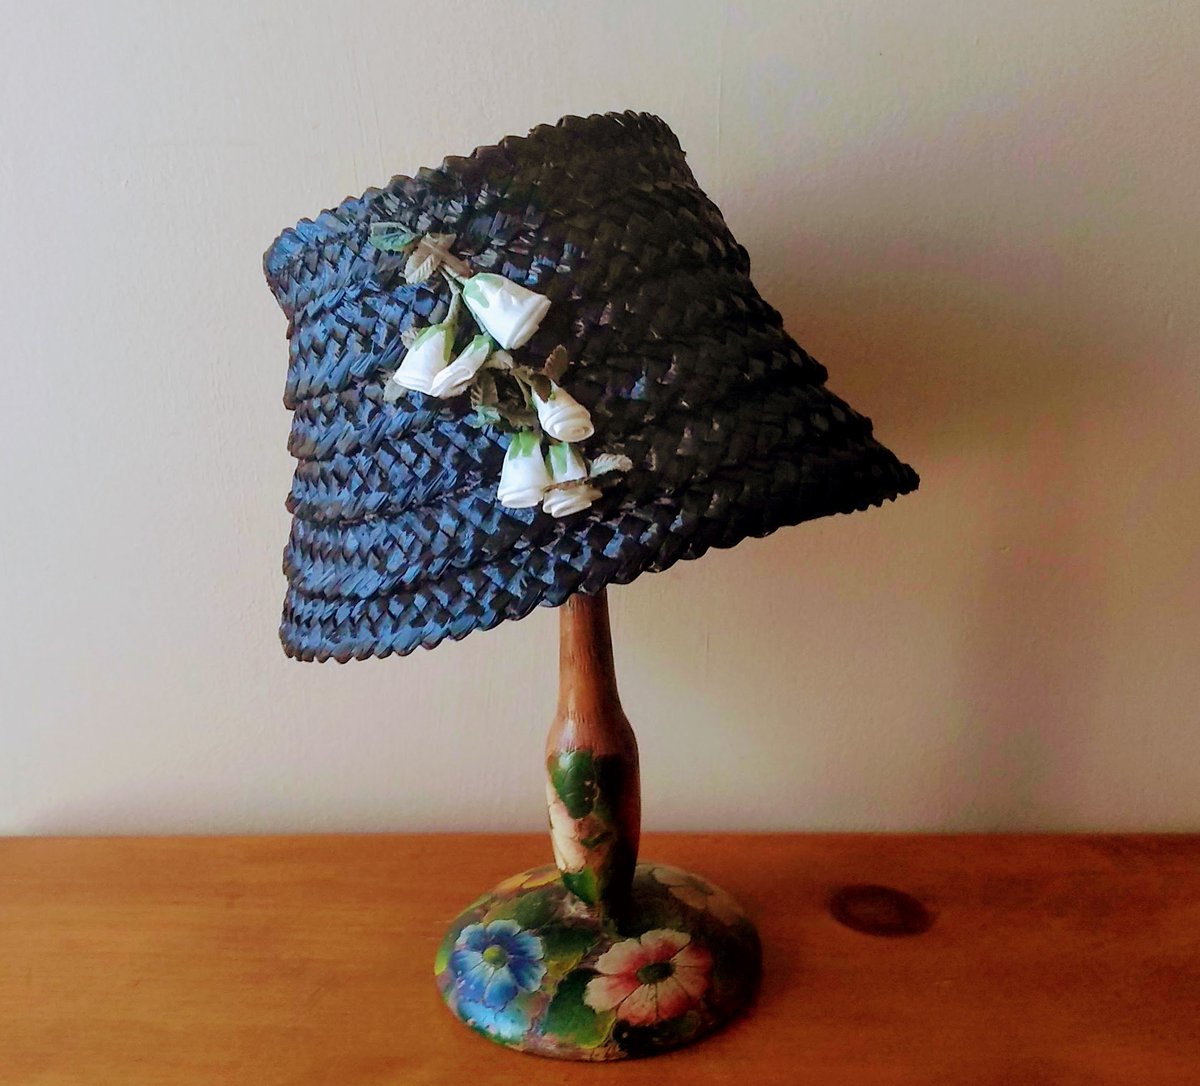 Vintage 1960's Black Straw with Floral Embellishment Lampshade Bucket Hat
#funhats #funvintage #vintagehats #vintagefashion #hats #1960sstyle #buckethat #whimsicalvintage #etsy #etsyshop